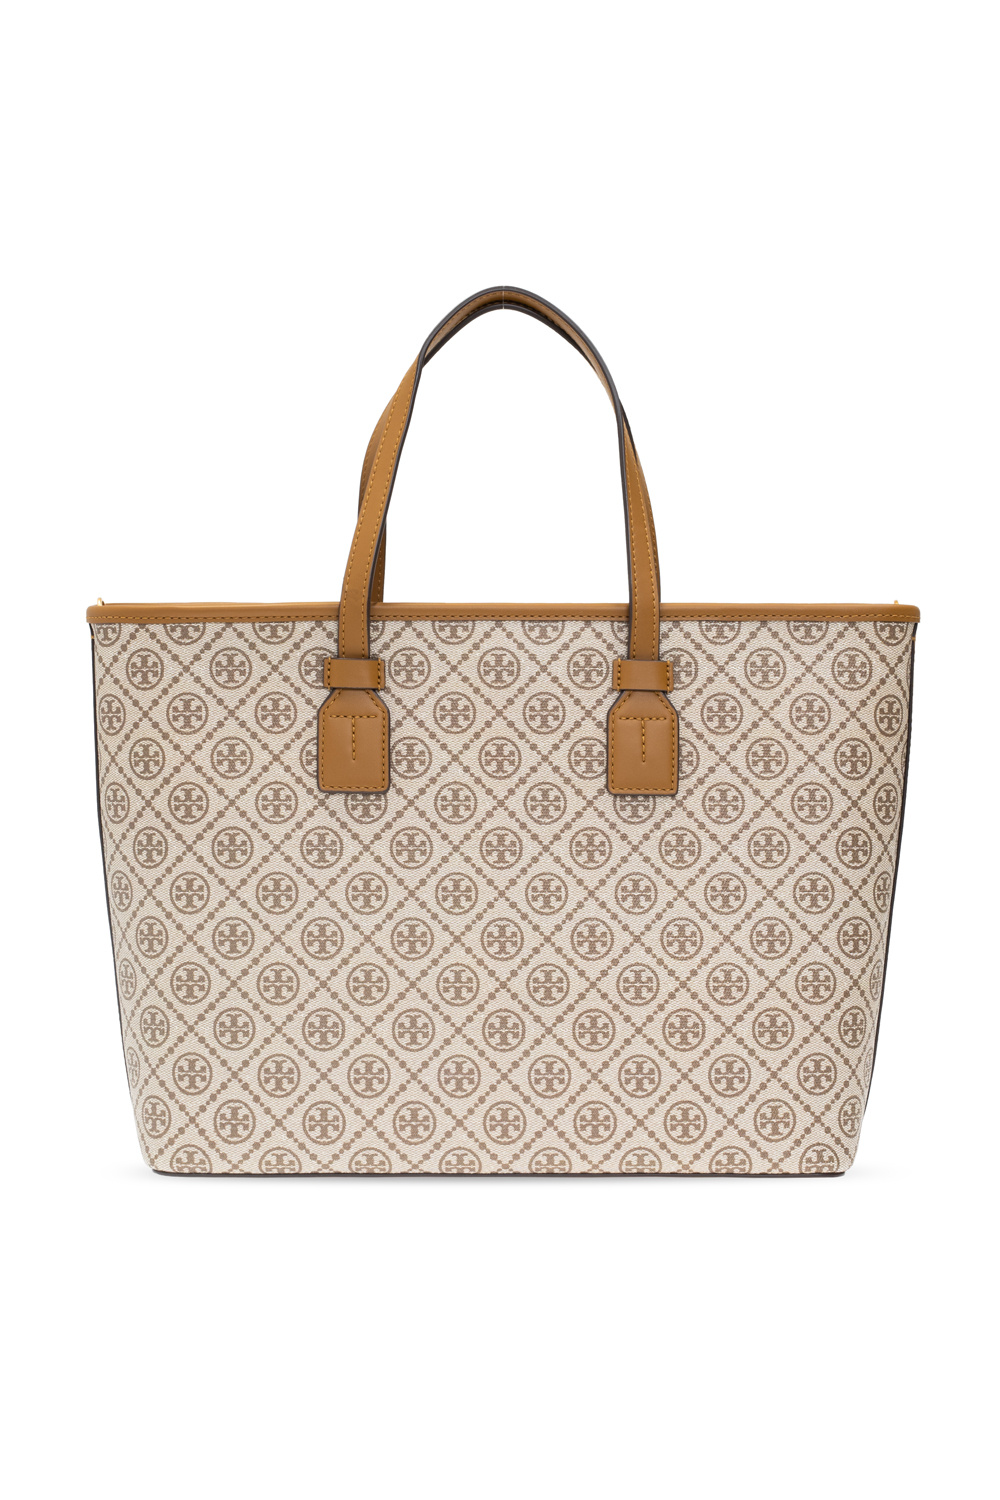 Monogram Leather Journey Tote Shoulder Bag (Authentic) – The Lady Bag